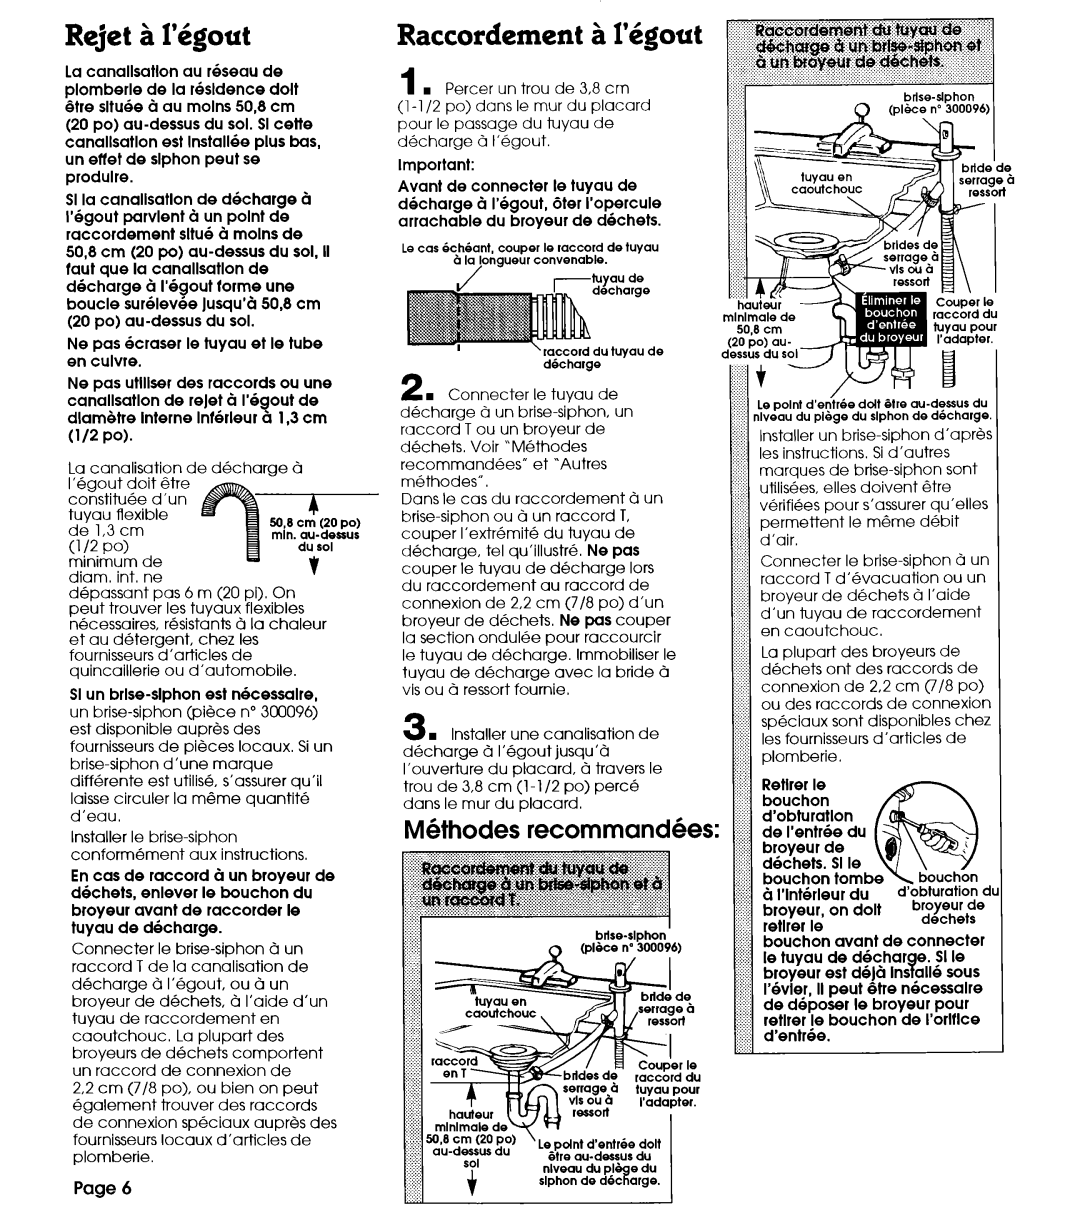 Whirlpool 801 installation instructions Rejet 21I’6gout, Raccordement A I’bgout, Mbthodes recommand6es 